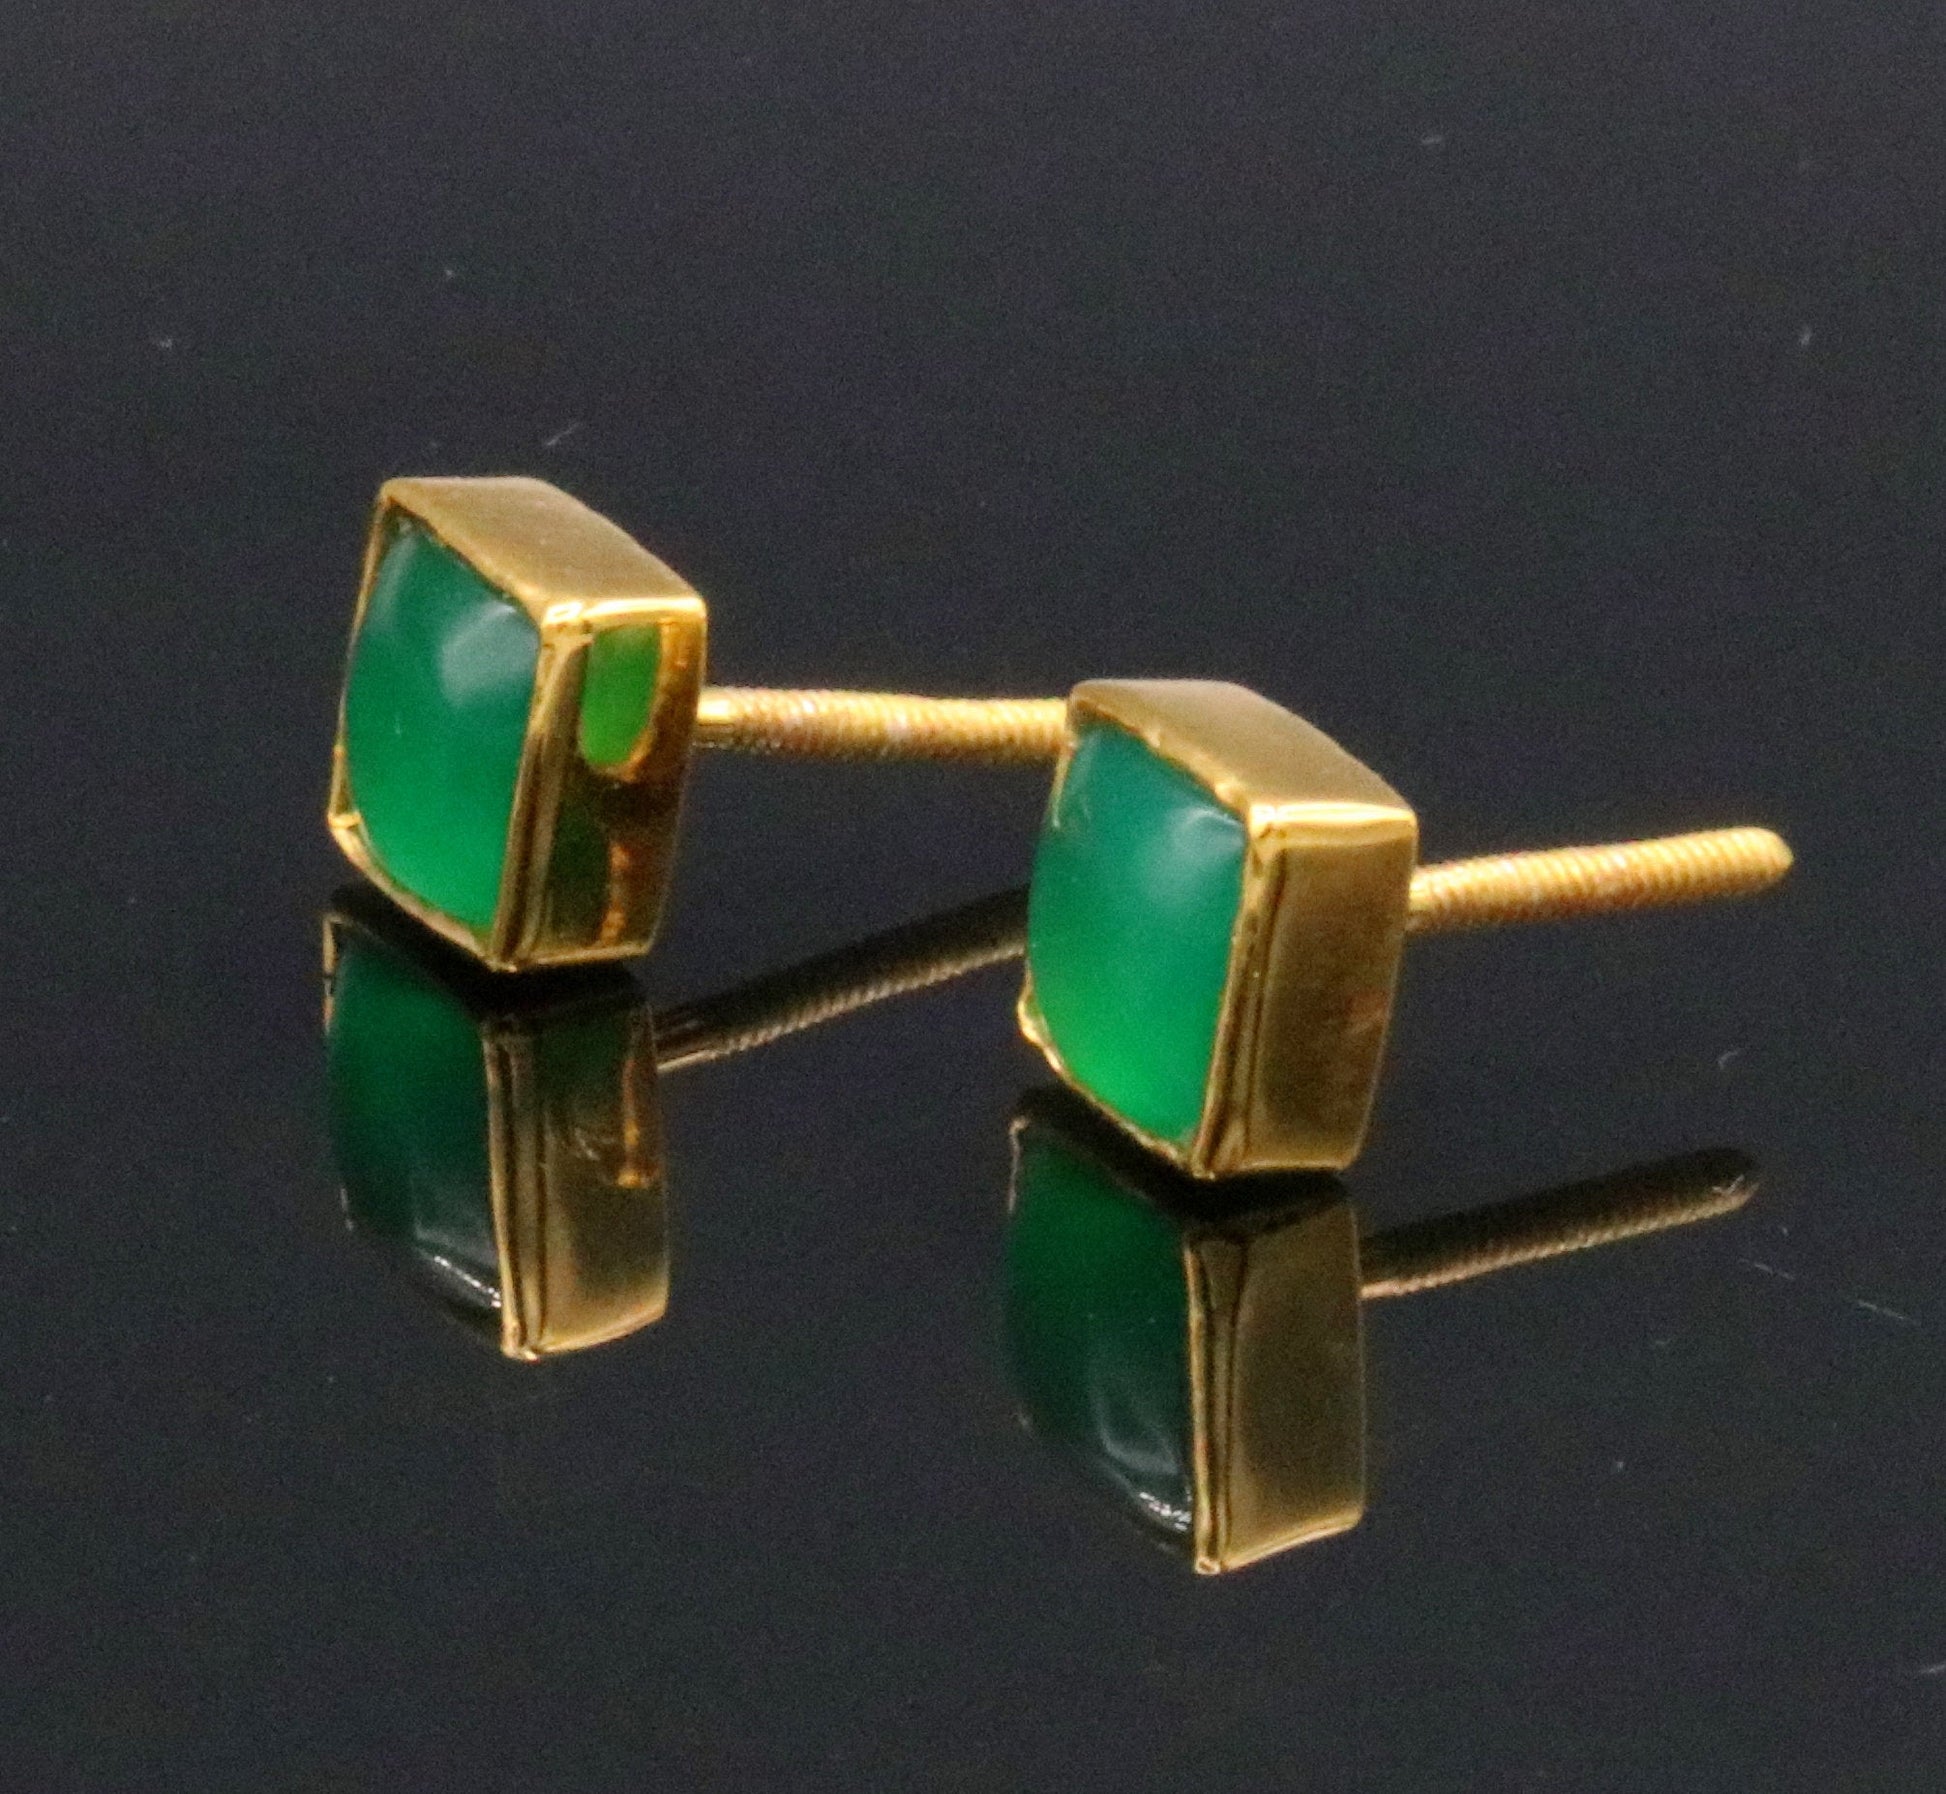 22 kt yellow gold handmade fabulous green stone stud earring unisex gifting jewelry excellent design stud - TRIBAL ORNAMENTS